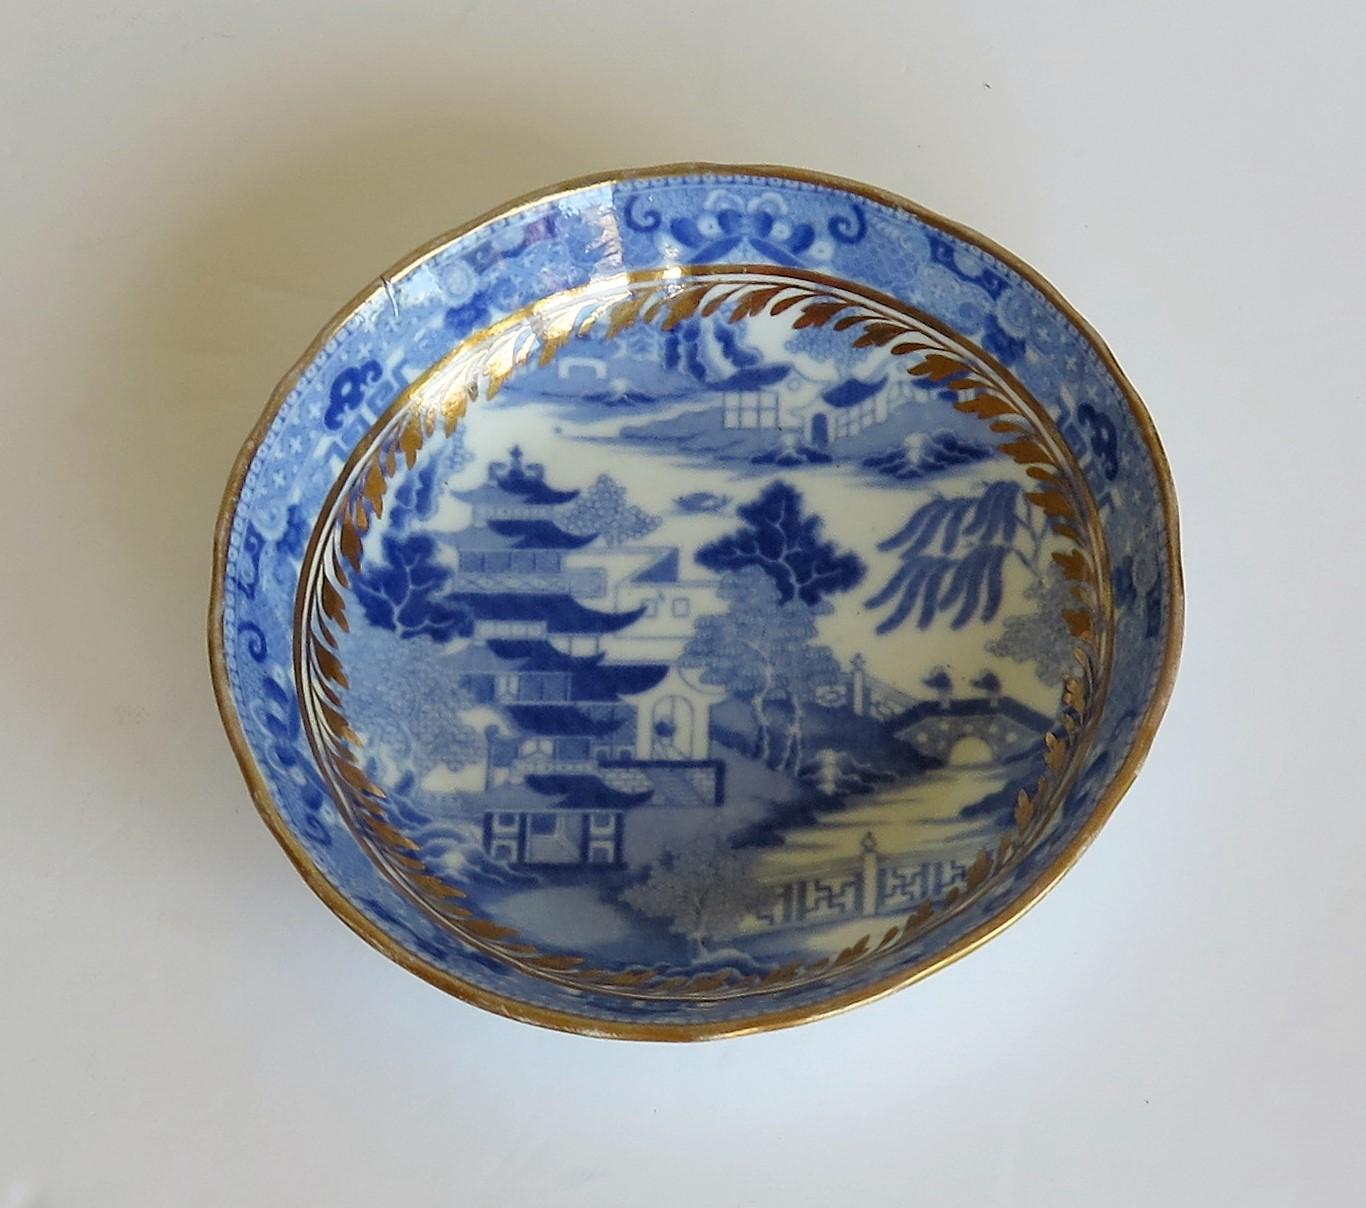 Miles Mason Porcelain Saucer Dish Blue and White Gilded Broseley Pattern Ca 1805 1